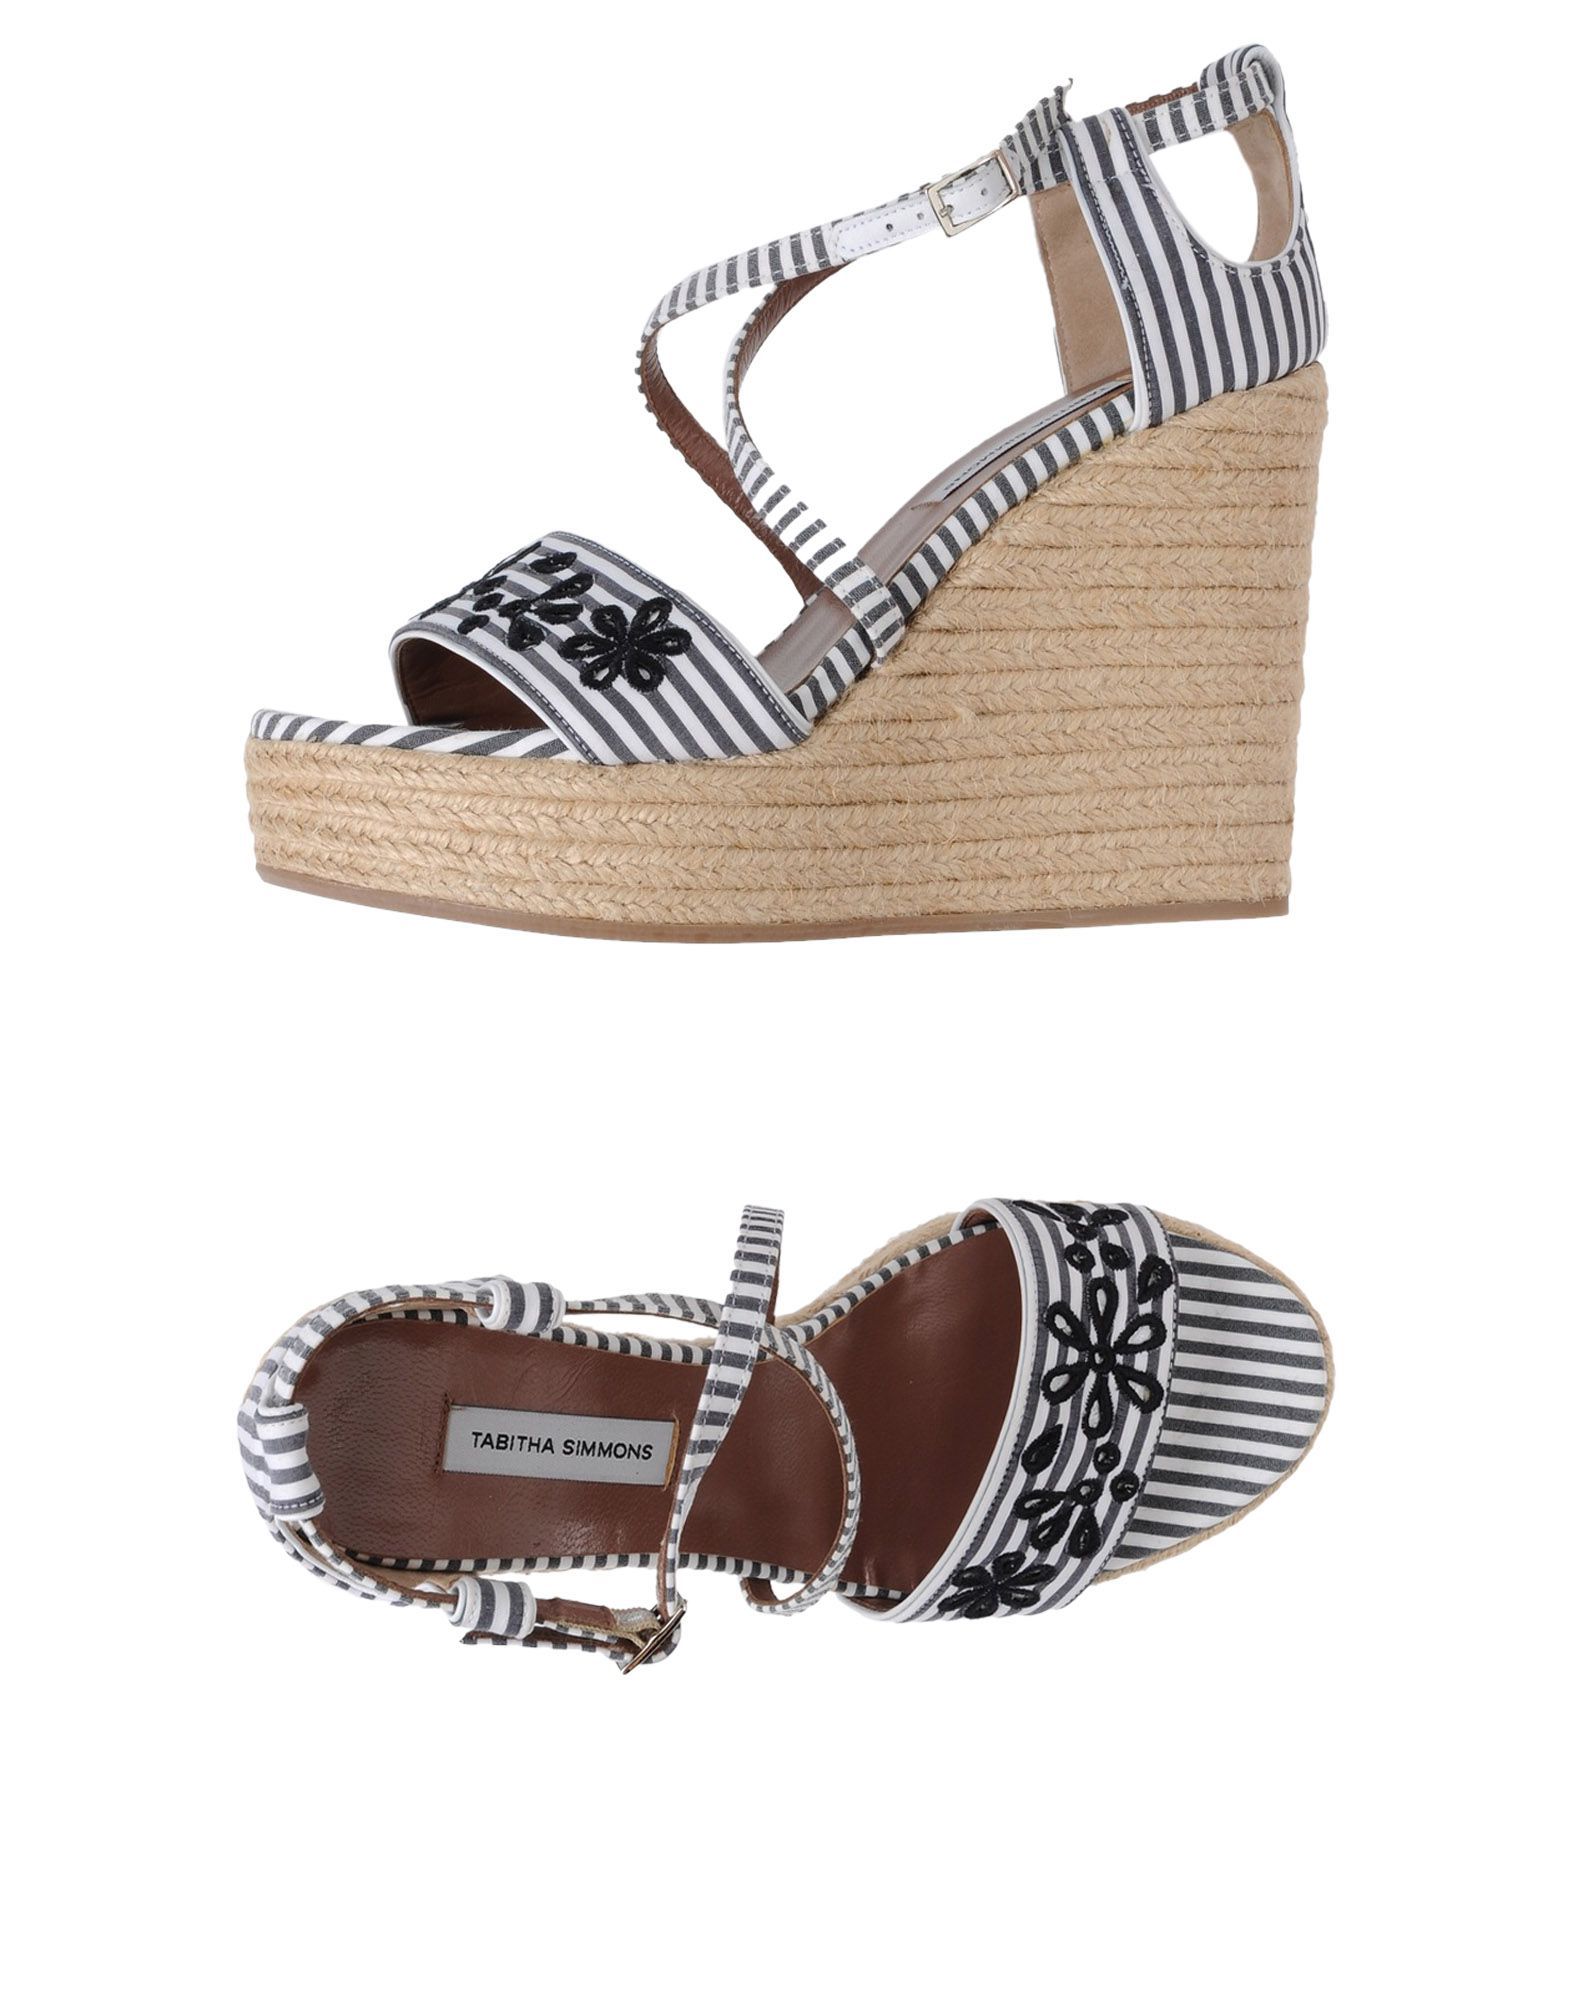 Plain weave<br>Embroidered detailing<br>Stripes<br>Buckle<br>Round toeline<br>Wedge heel<br>Rope wedge<br>Leather lining<br>Rubber sole<br>Contains non-textile parts of animal origin<br>